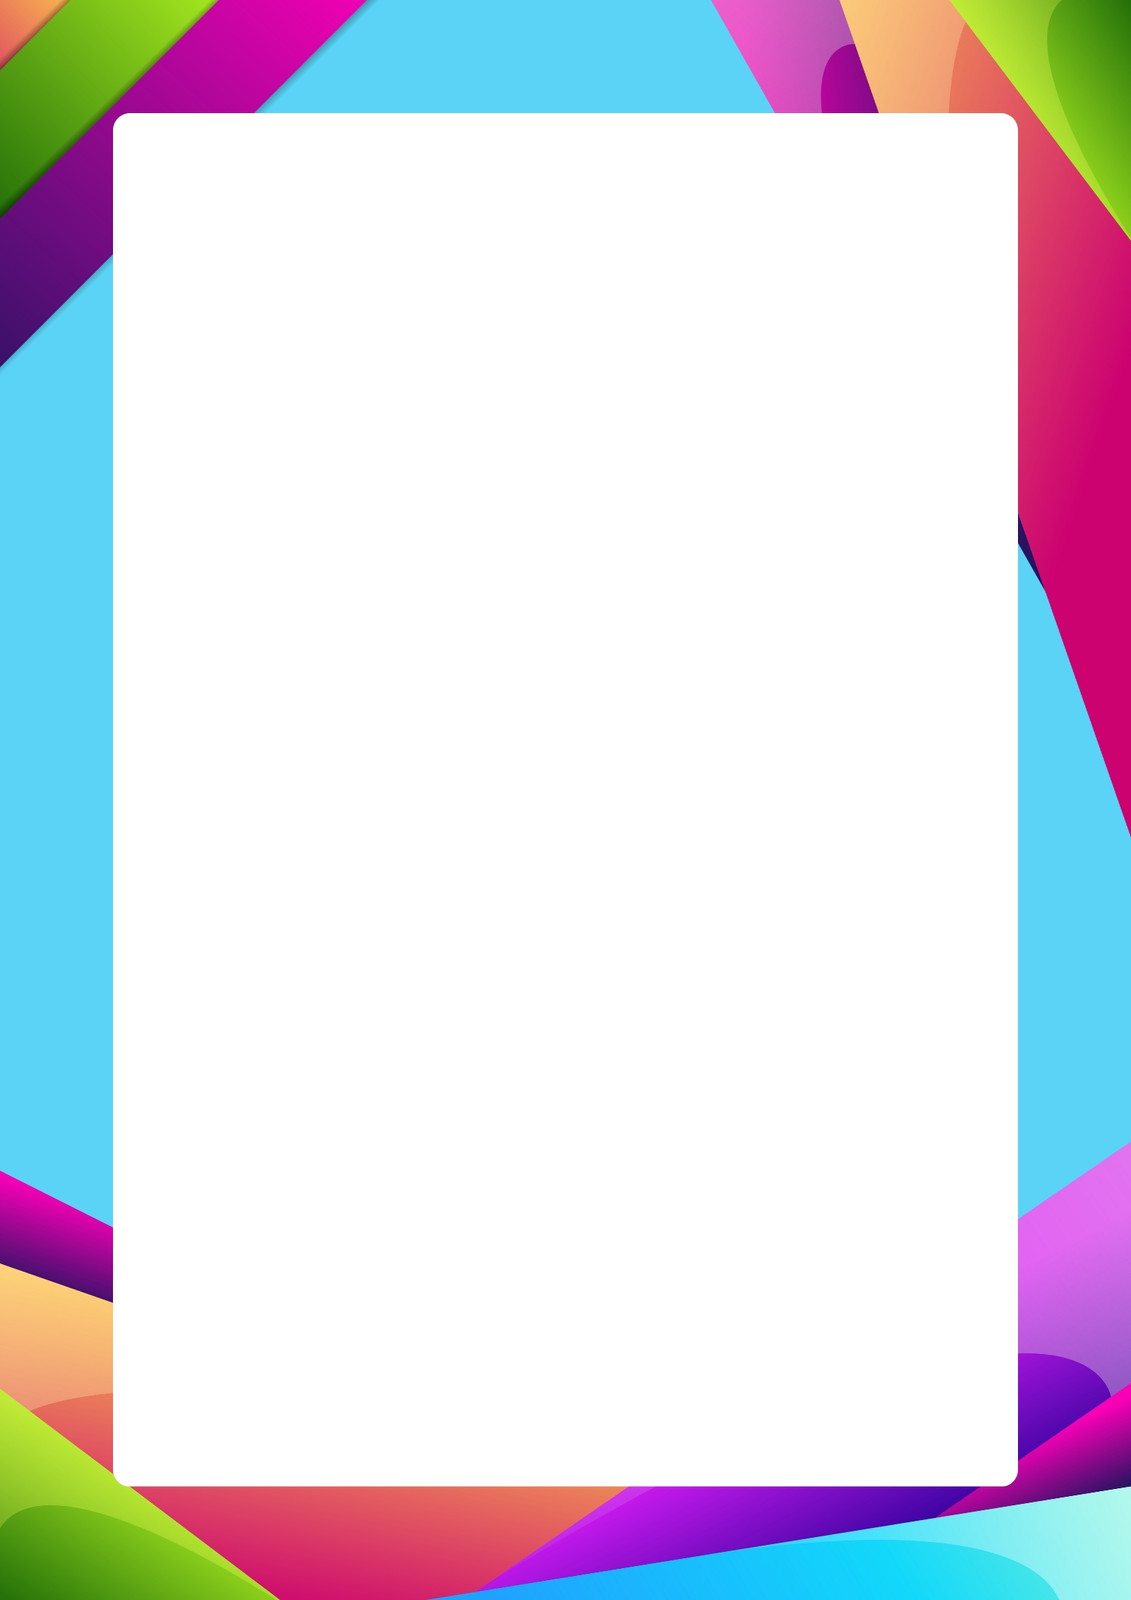 White Square Board and Border on Colorful Line Abstract Design